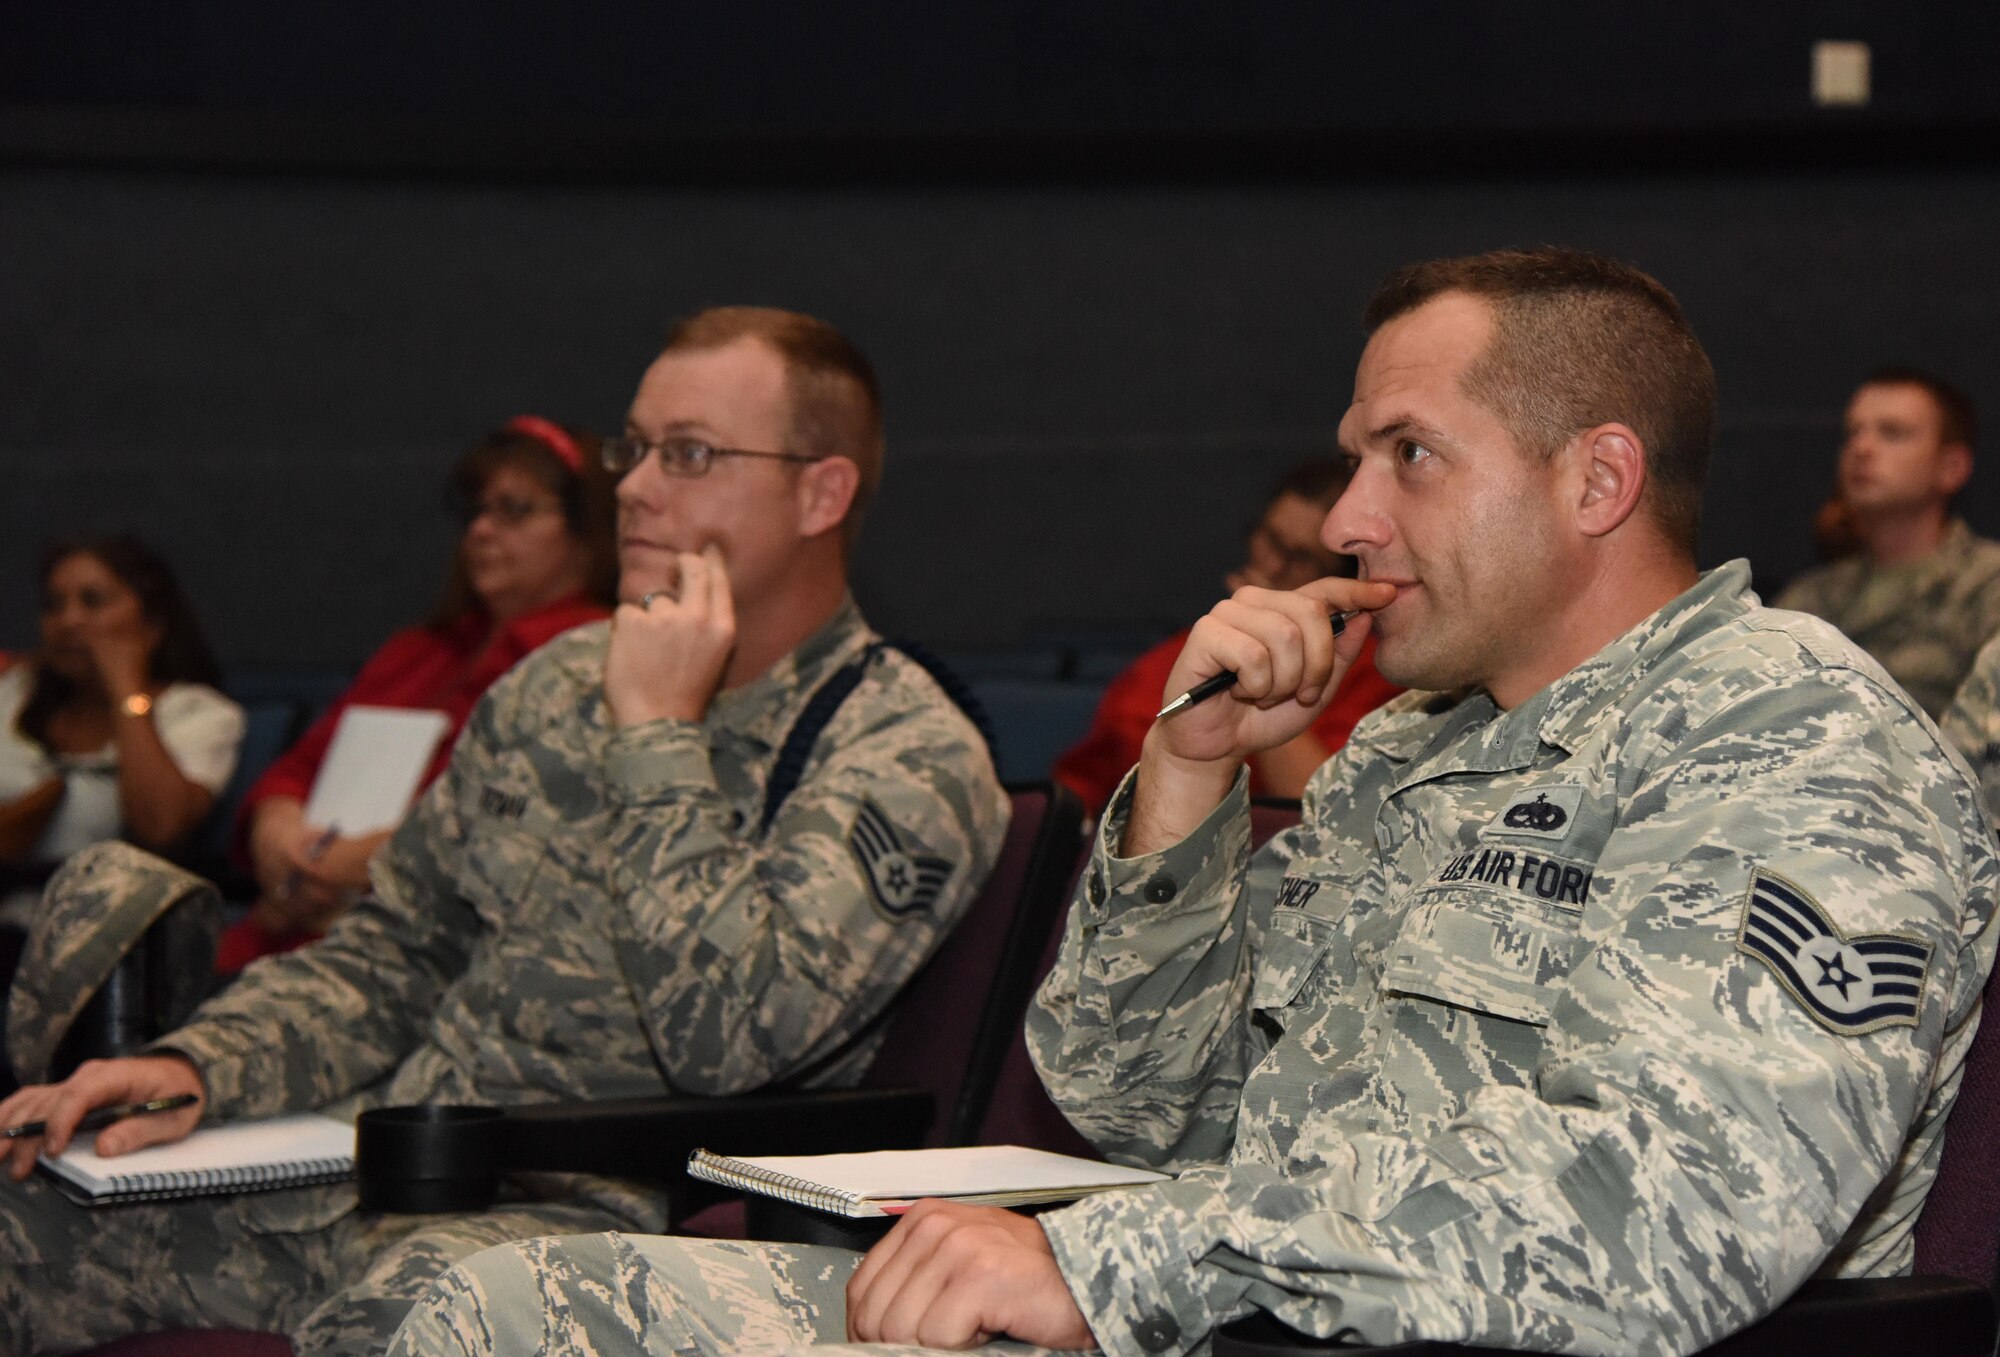 Staff Sgt. Travis Rayman, 335th Training Squadron military training leader, and Staff Sgt. Eric Dasher, 335th TRS instructor, attend the Base Operations Support town hall meeting at the Welch Theater July 26, 2017, on Keesler Air Force Base, Miss. The meeting was to discuss the new base operations support contract revisions. (U.S. Air force photo by Kemberly Groue)